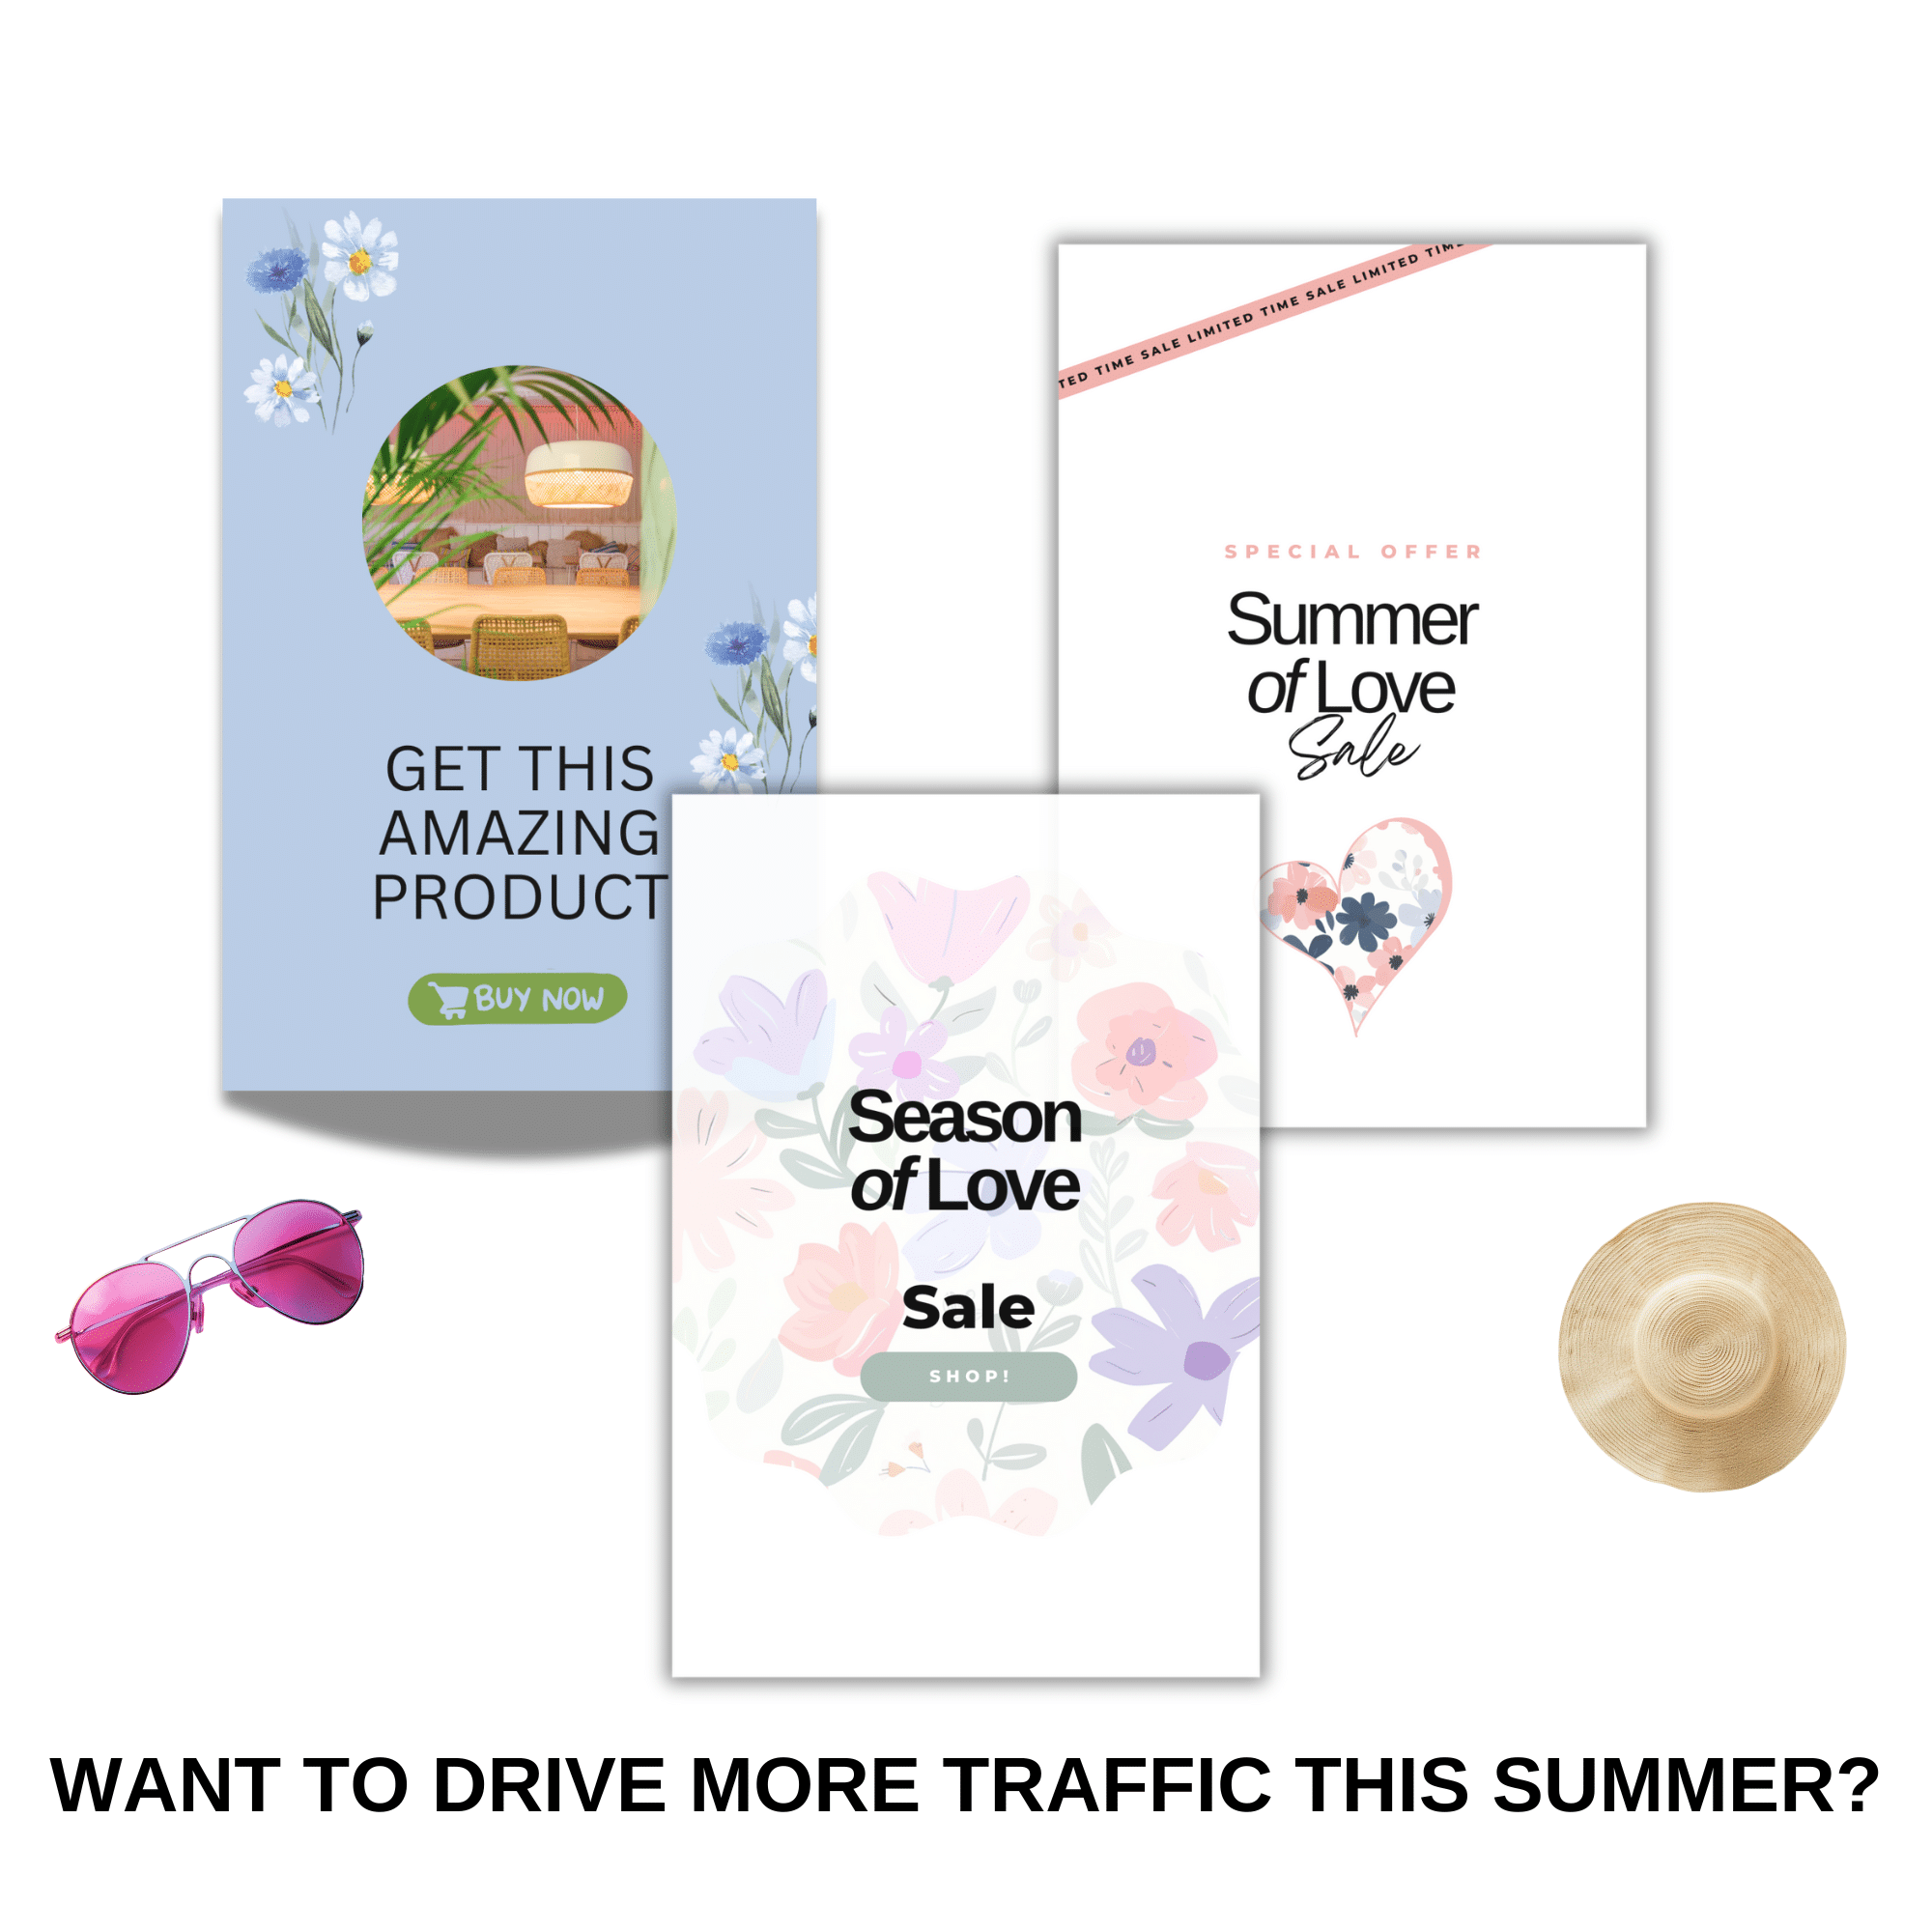 Want to Drive More Traffic This summer?